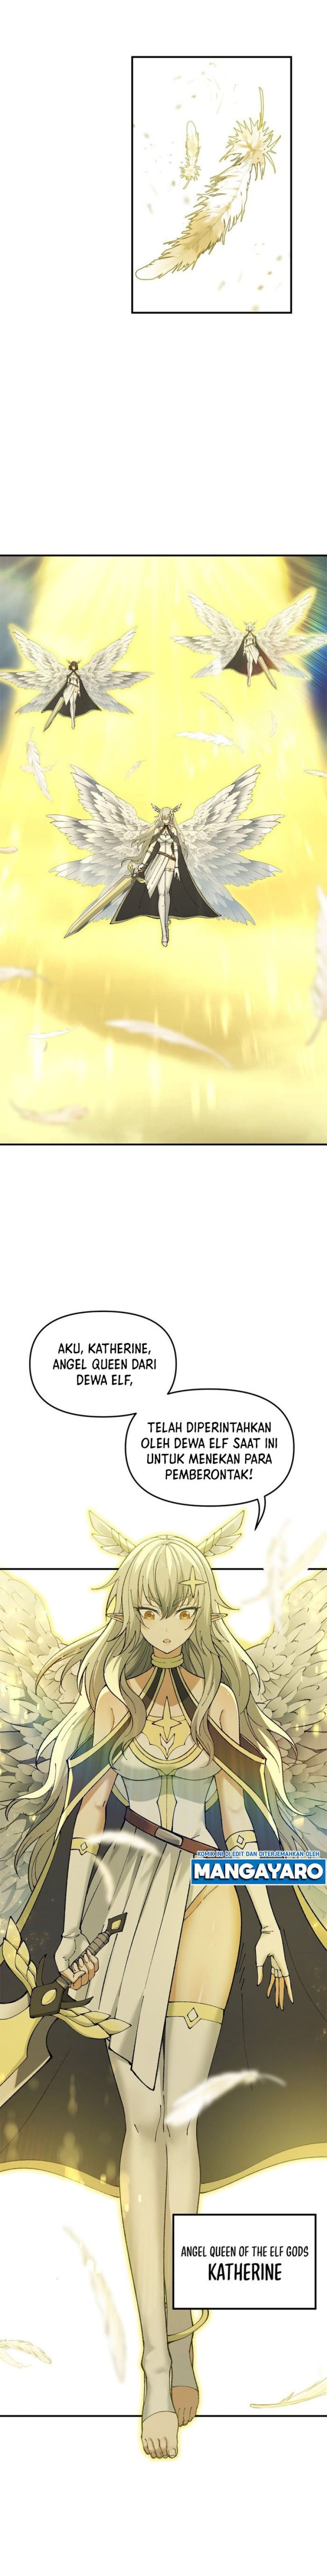 The Heavenly Path Is Not Stupid Chapter 16 18